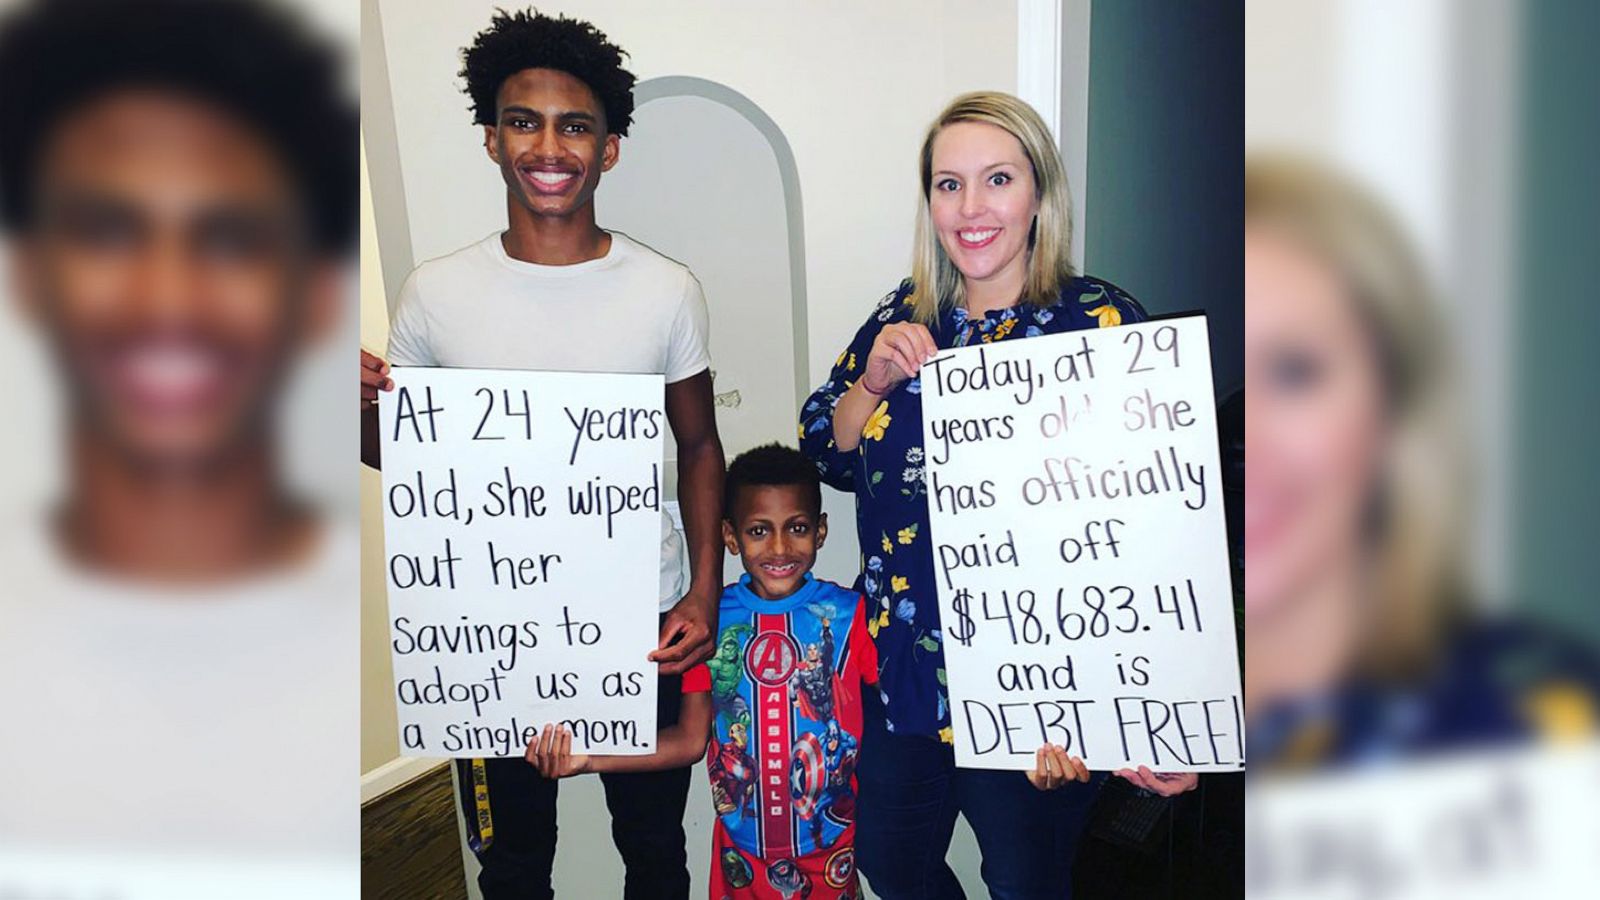 PHOTO: Chelsea Haley, 29, of Marietta, Georgia, mom of Jerome, 17, and Jace, 6, has eliminated a total of $48,683.41 in debt, which is the amount she owed in credit cards and student loans with interest.